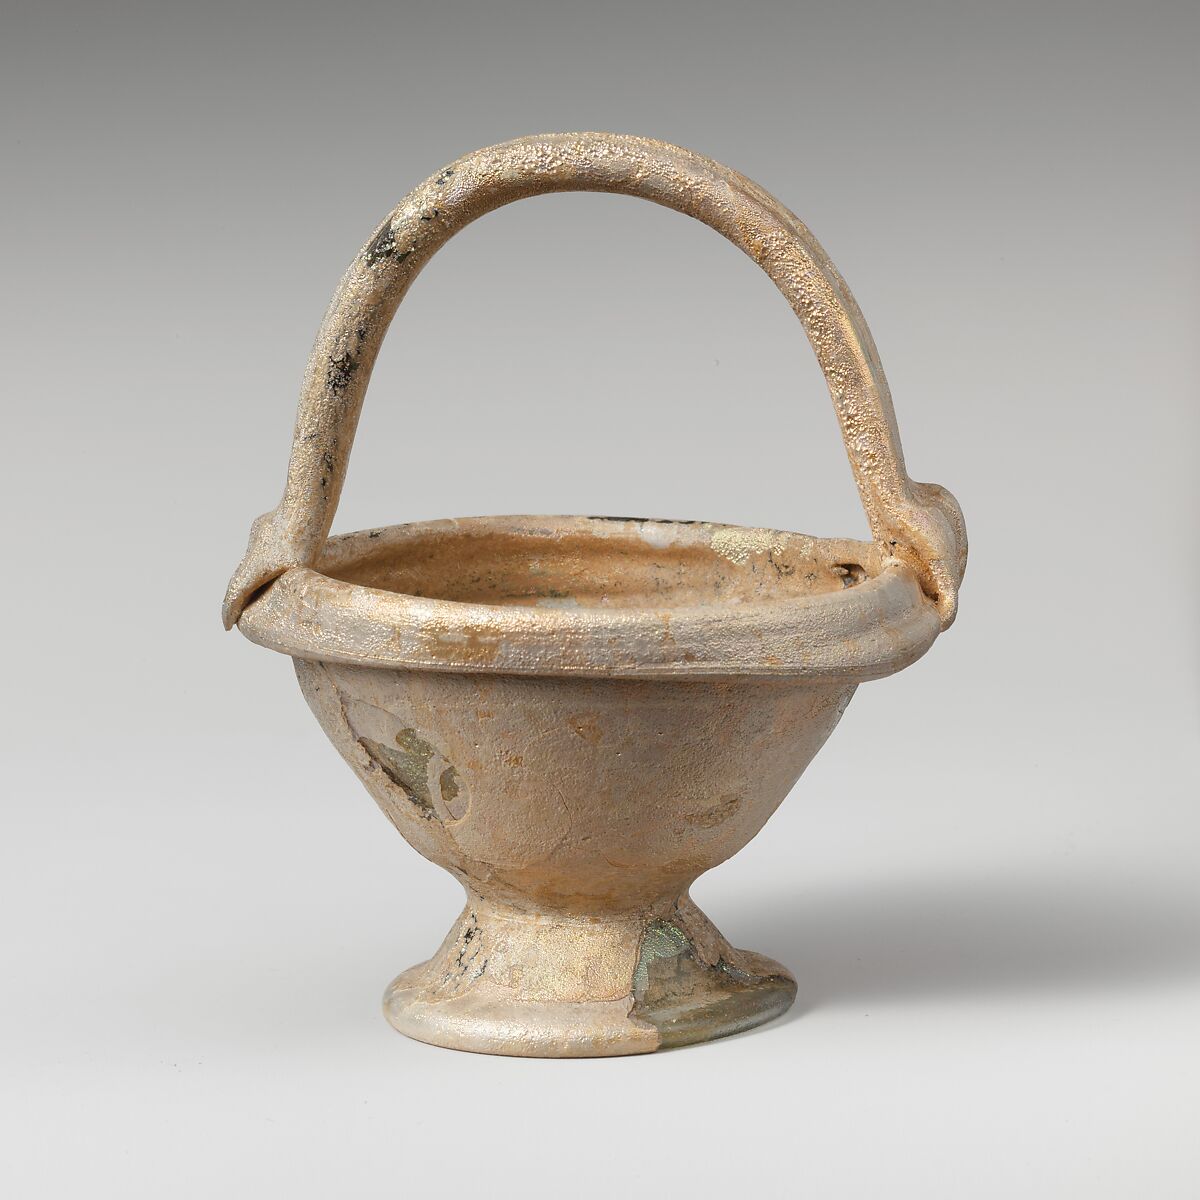 Glass bowl with basket handle, Glass, Roman, Syrian 